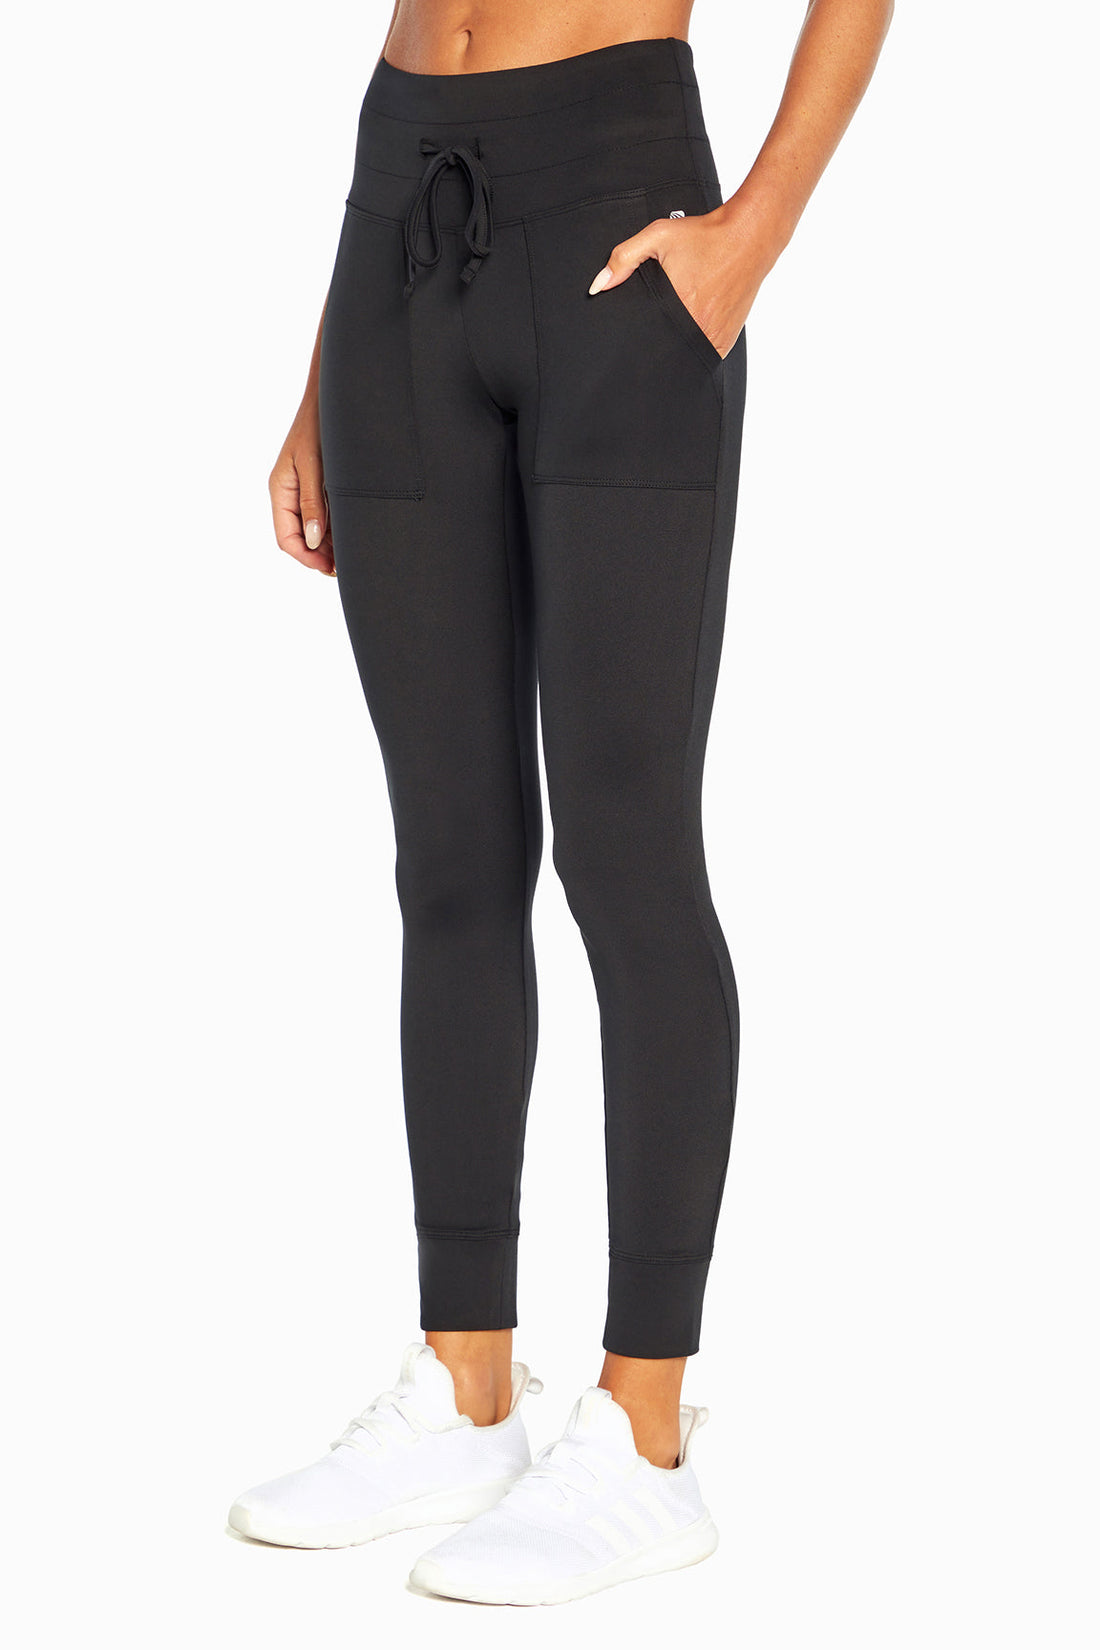 3 for $39 Leggings – tagged cf-size-s – Marika